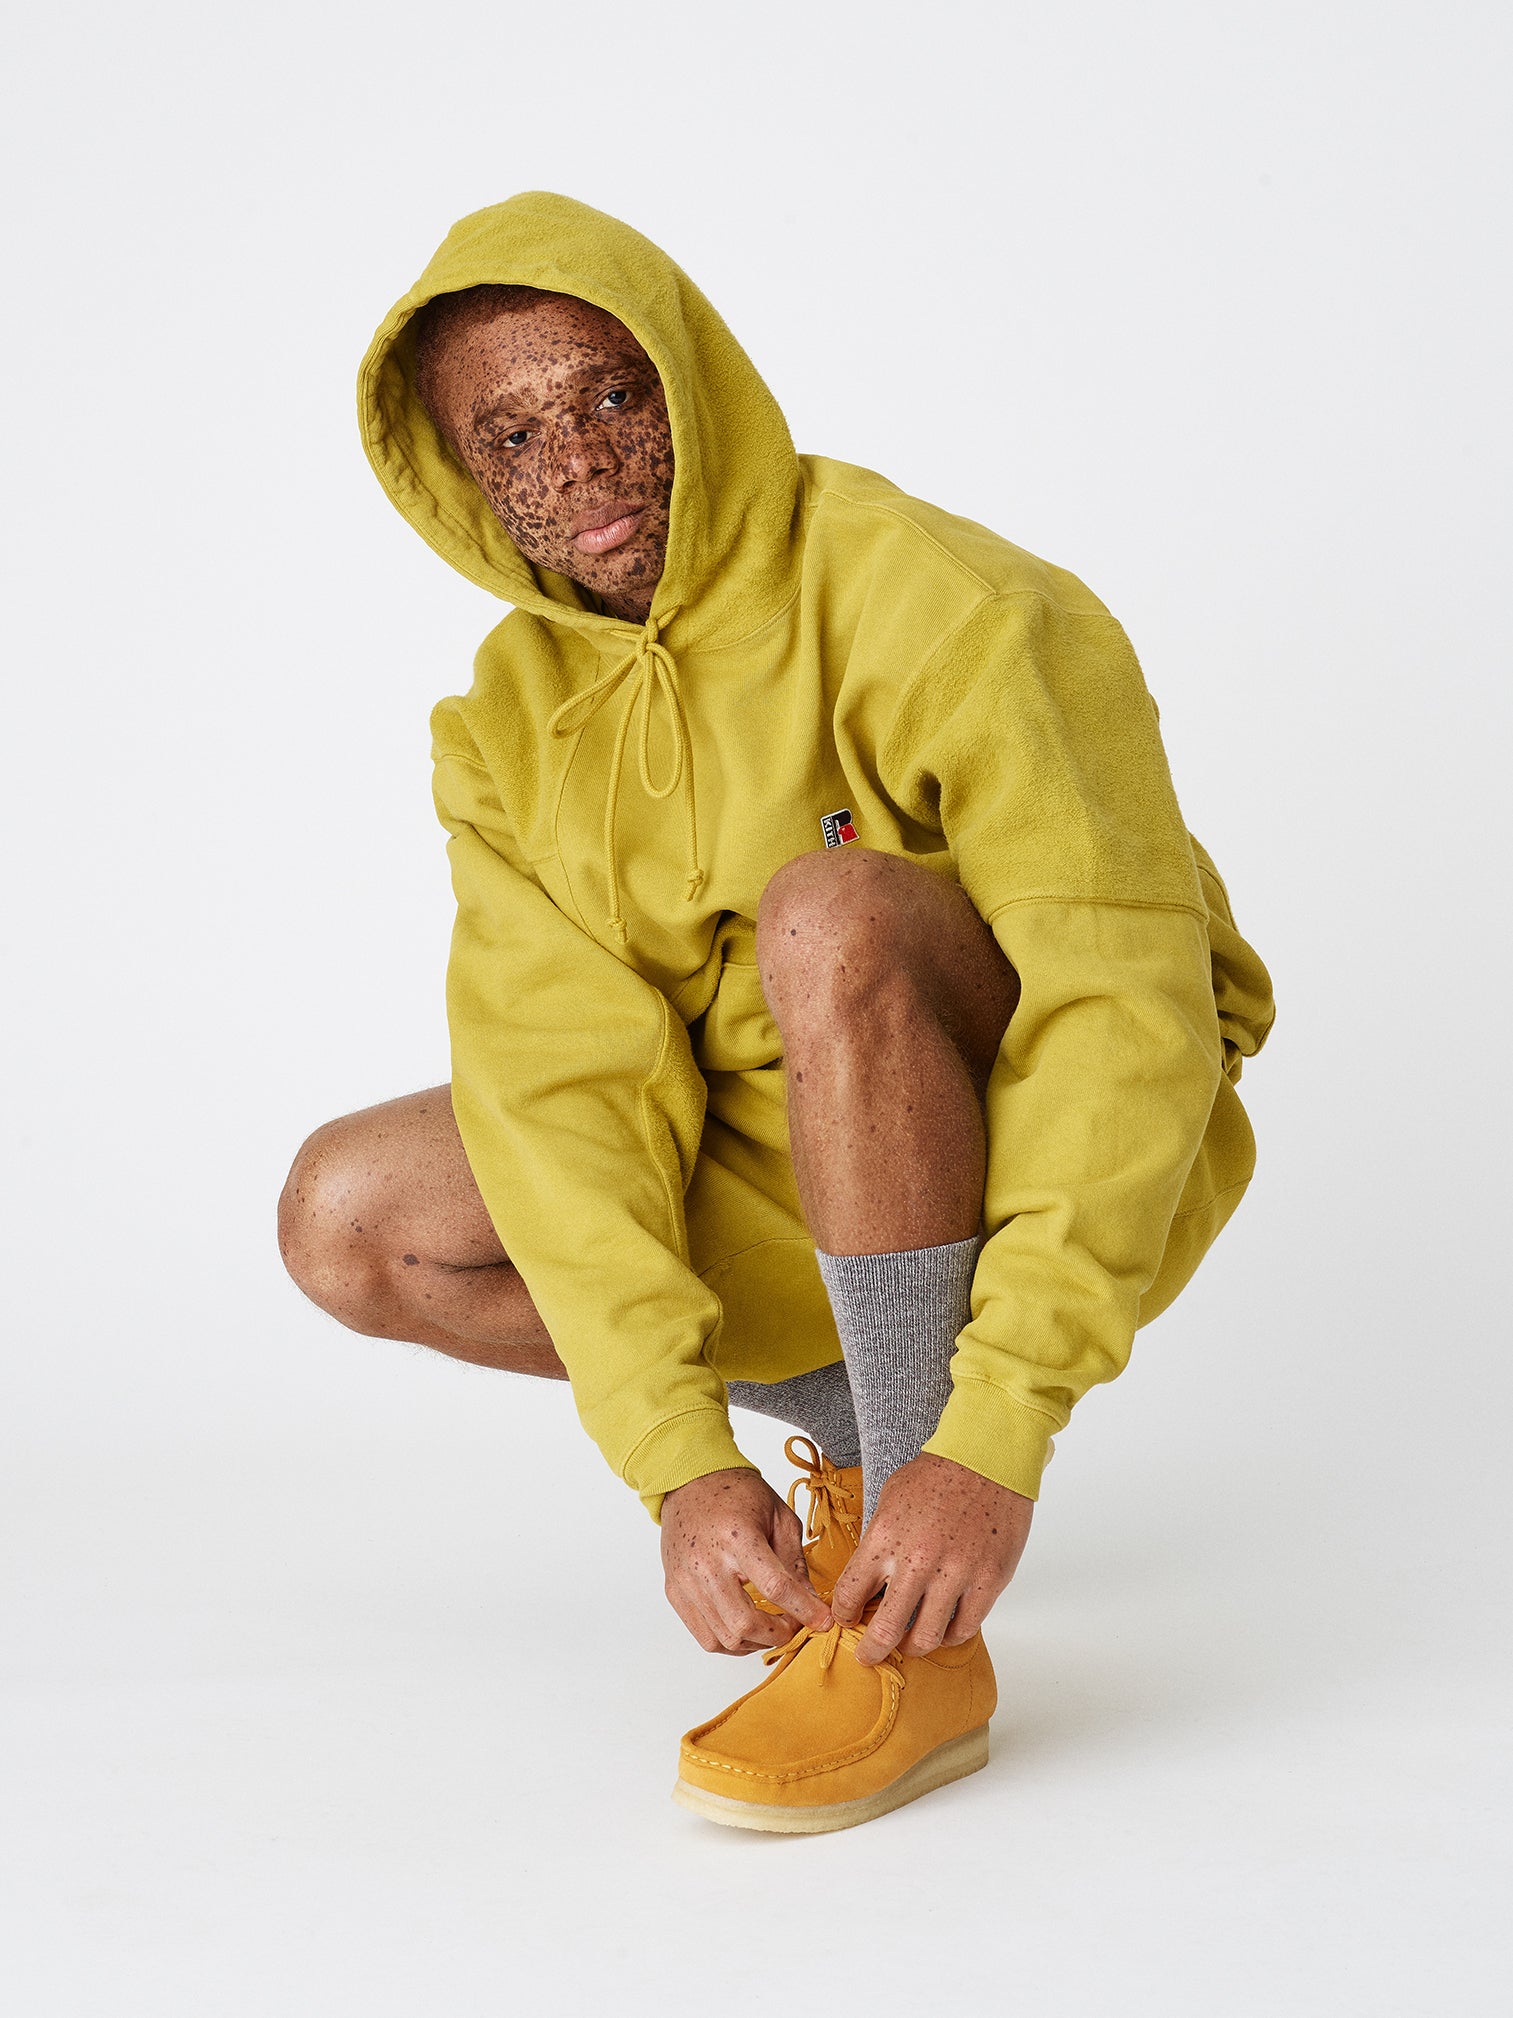 Kith x Russell Athletic Vintage Hoodie Blossom Men's - SS19 - US